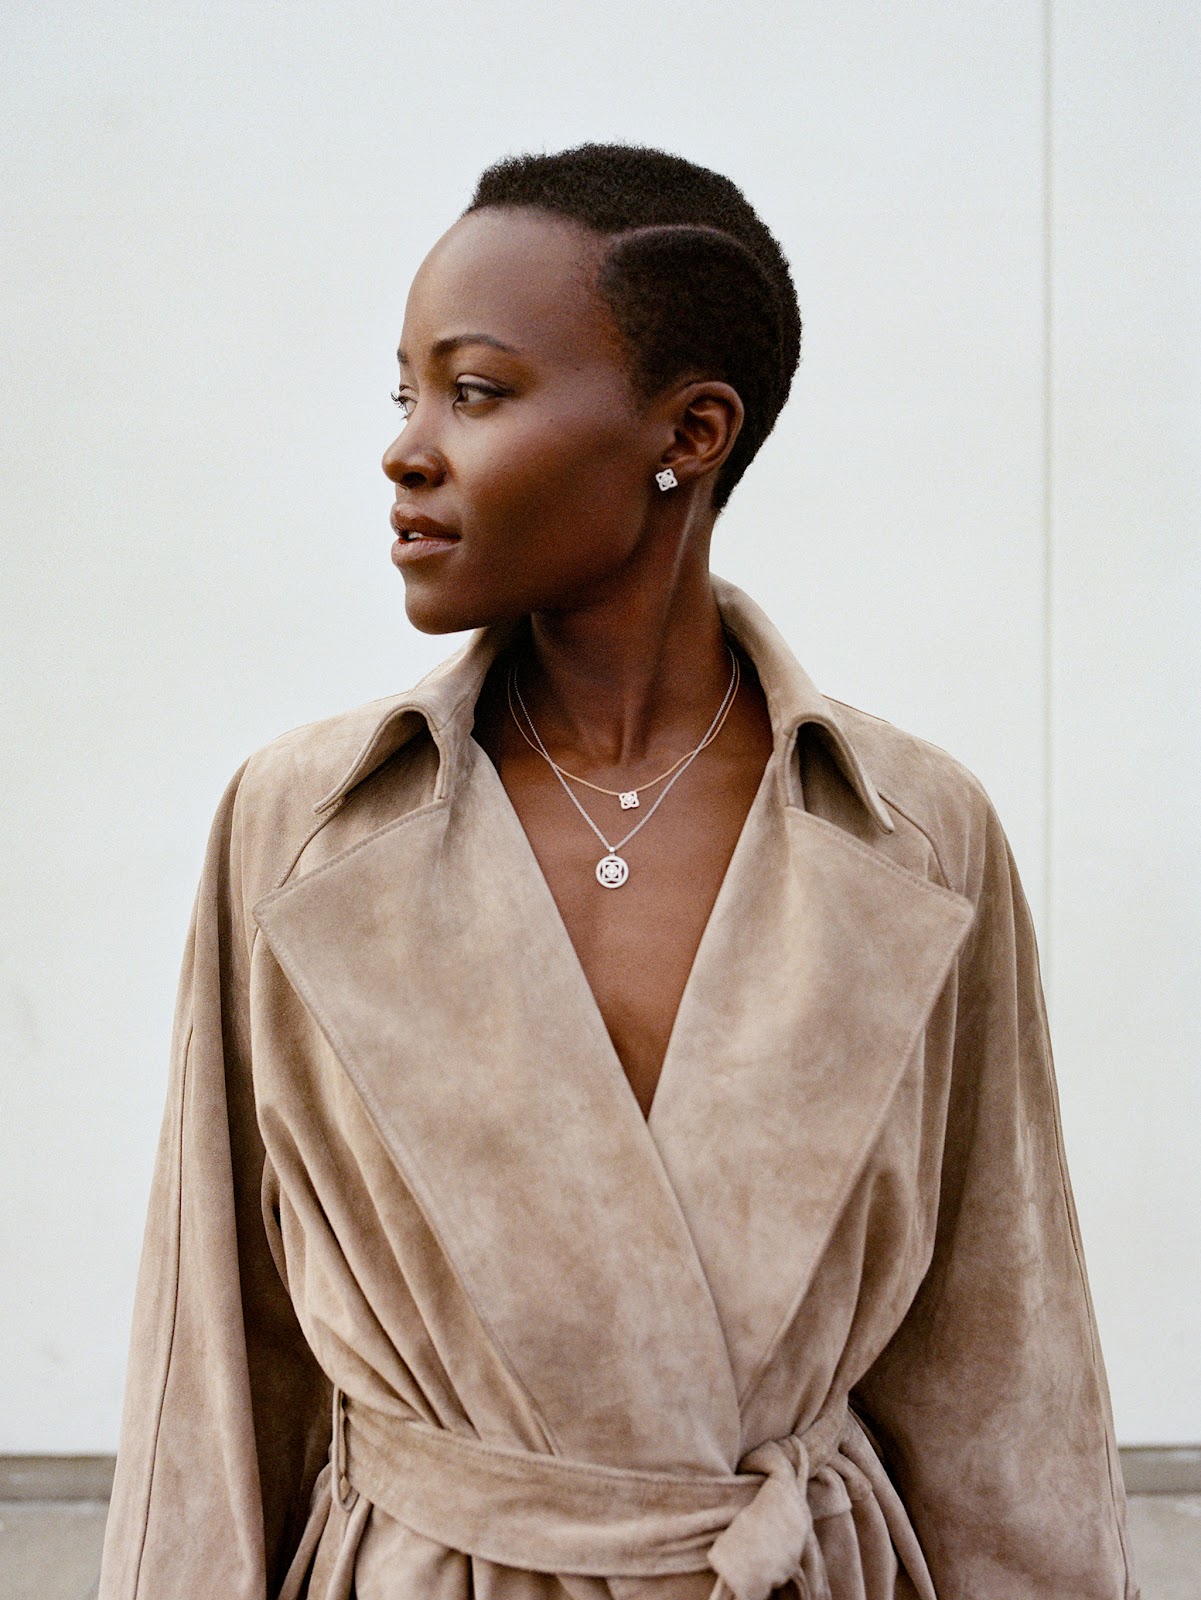 Lupita Nyong'O in Porter Edit 26th February 2024 by Menelik Puryear - Fashion Editorials, Magazine Covers, Ad Campaigns, Fashion Photographers, Designers, Supermodels, Models, Stylists, Fashion Design, Hair, Beauty, Art, Vogue, Elle, Harper's Bazar, Grazia, Luxe, The Smile Blog, SmileBlog, Smile Blog, Smile Fashion, Smile Fashion Blog, Blog Smile, awake-smile.blogspot.com, awake-smile.blogspot, awake smile, awake smile fashion, fashion editorial blog, smile editorial